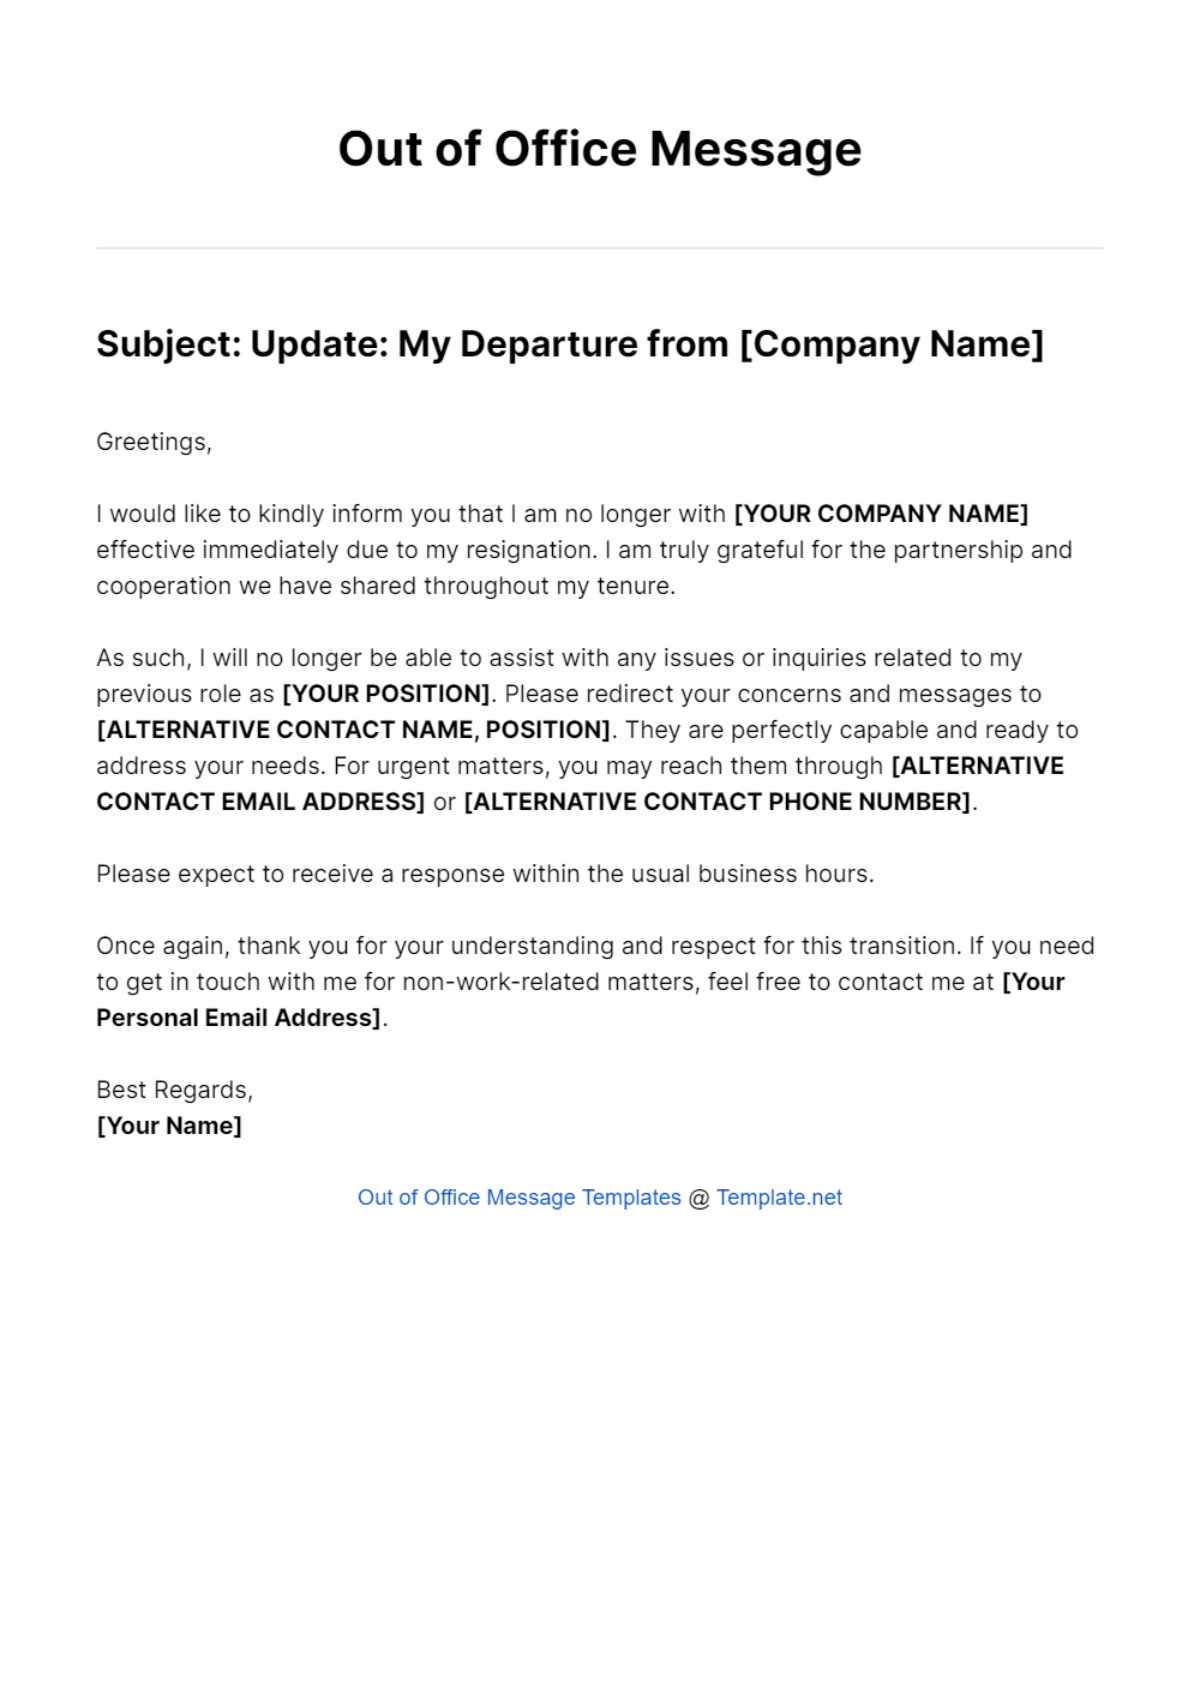 Resigned Out Of Office Message Template